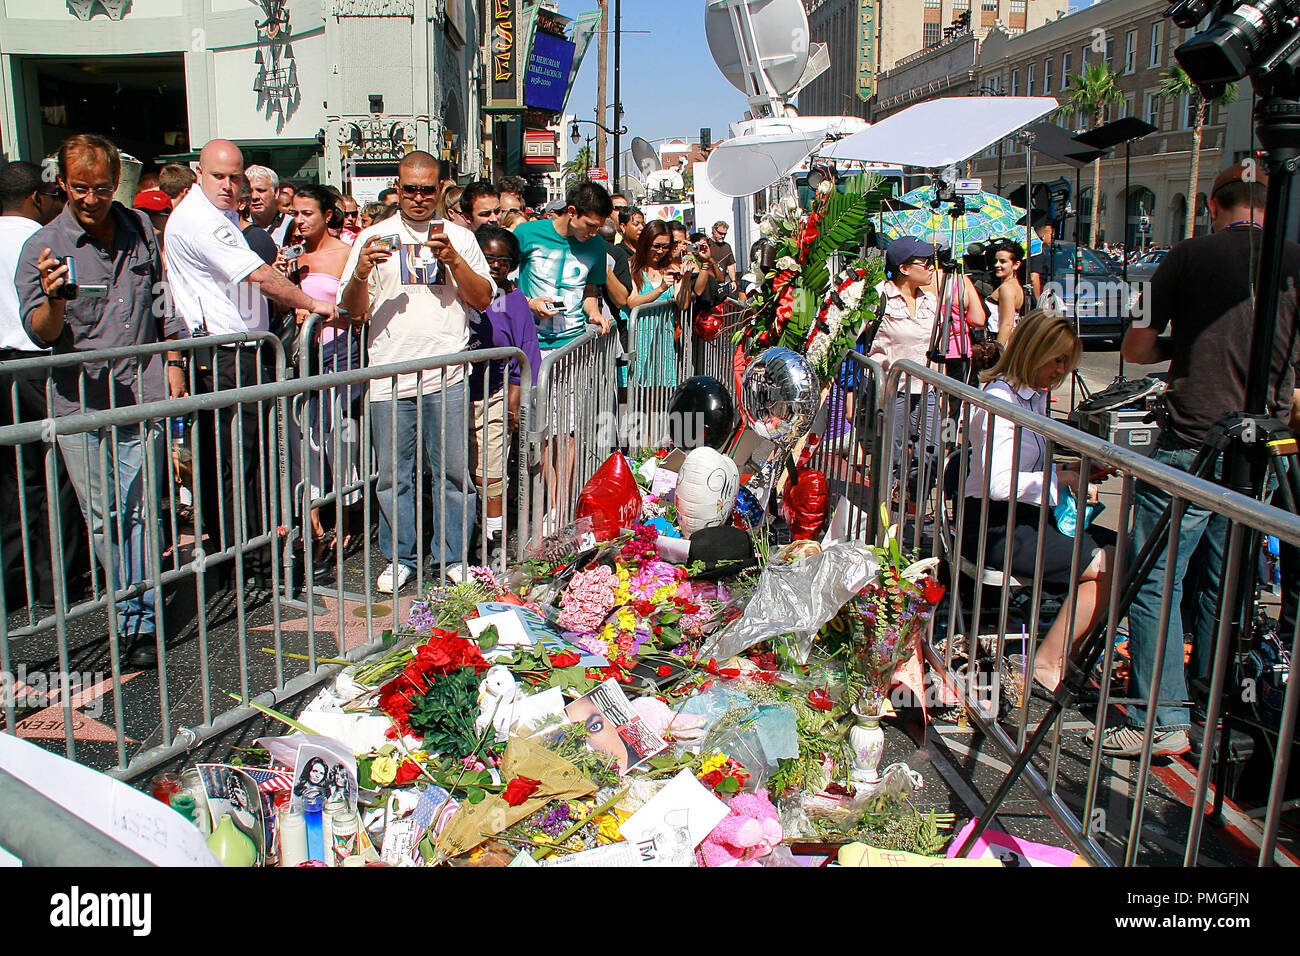 Media and fans converge on the Hollywood walk of fame to pay their respects to Michael Jackson at the make-shift shrine created on top of his Star in front of Grauman's Chinese Theatre in Hollywood, CA, June 27, 2009.  © Joseph Martinez / Picturelux - All Rights Reserved  File Reference # 30035 019PLX   For Editorial Use Only -  All Rights Reserved Stock Photo